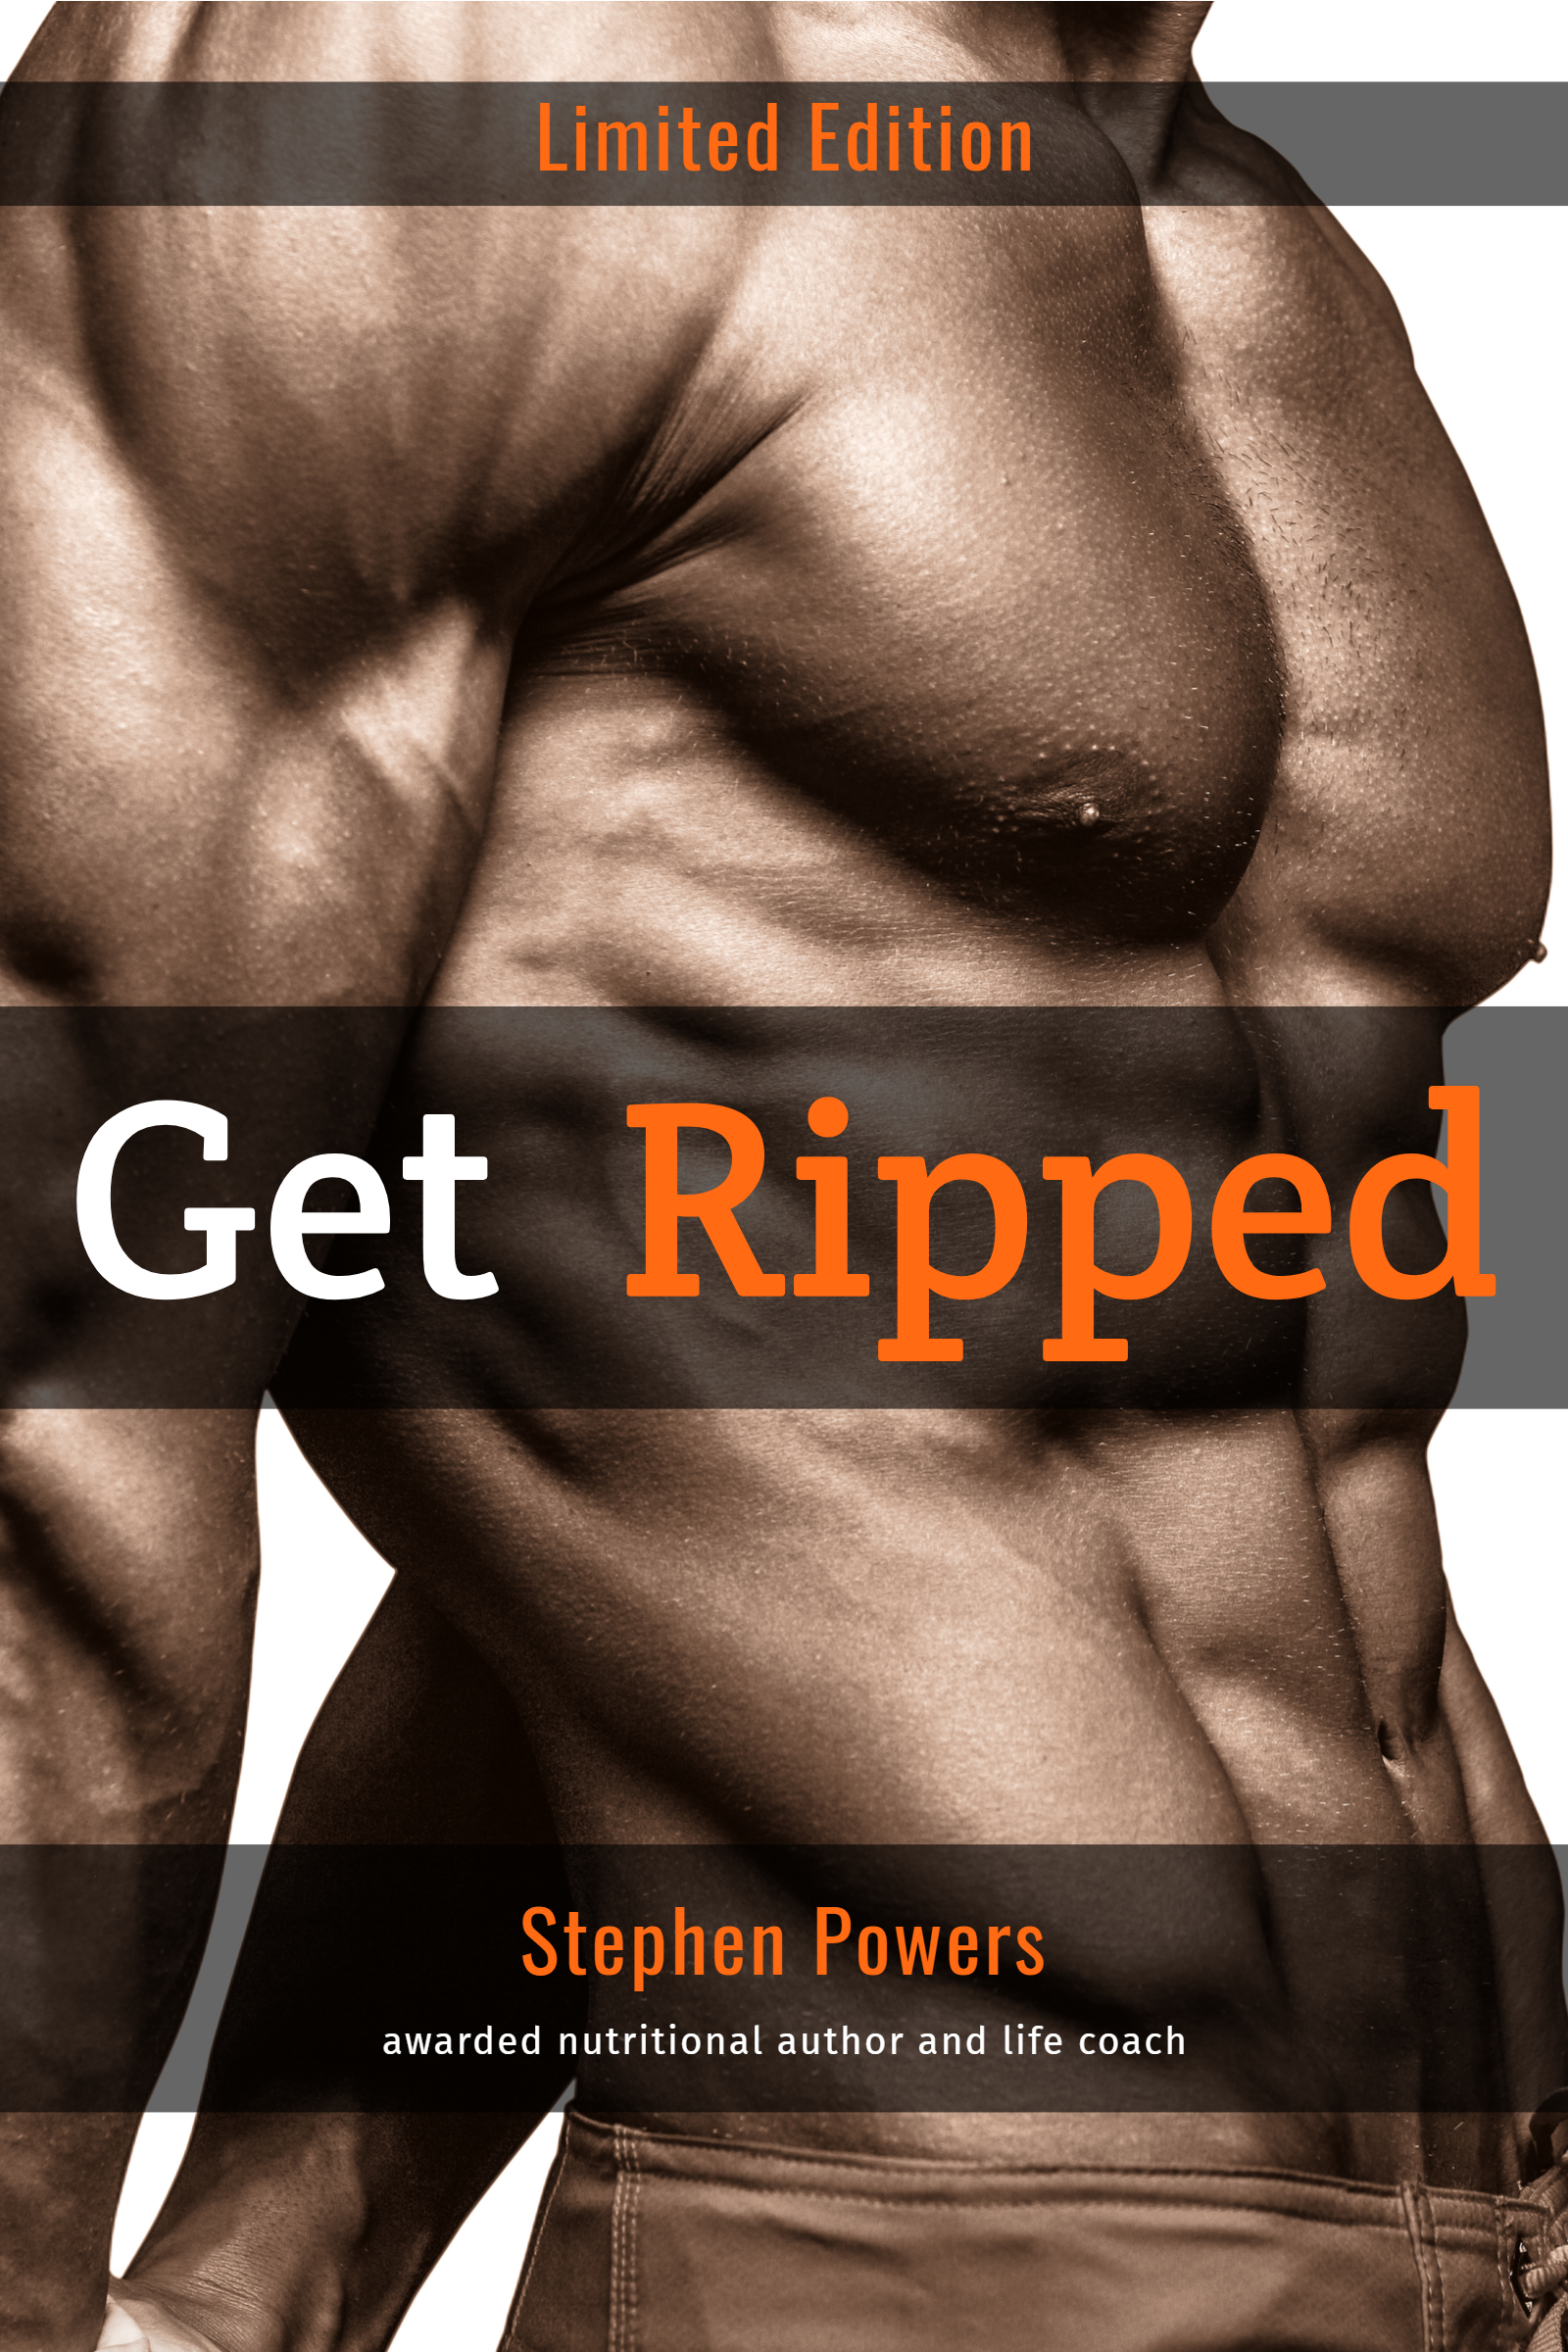 GET RIPPED Stack